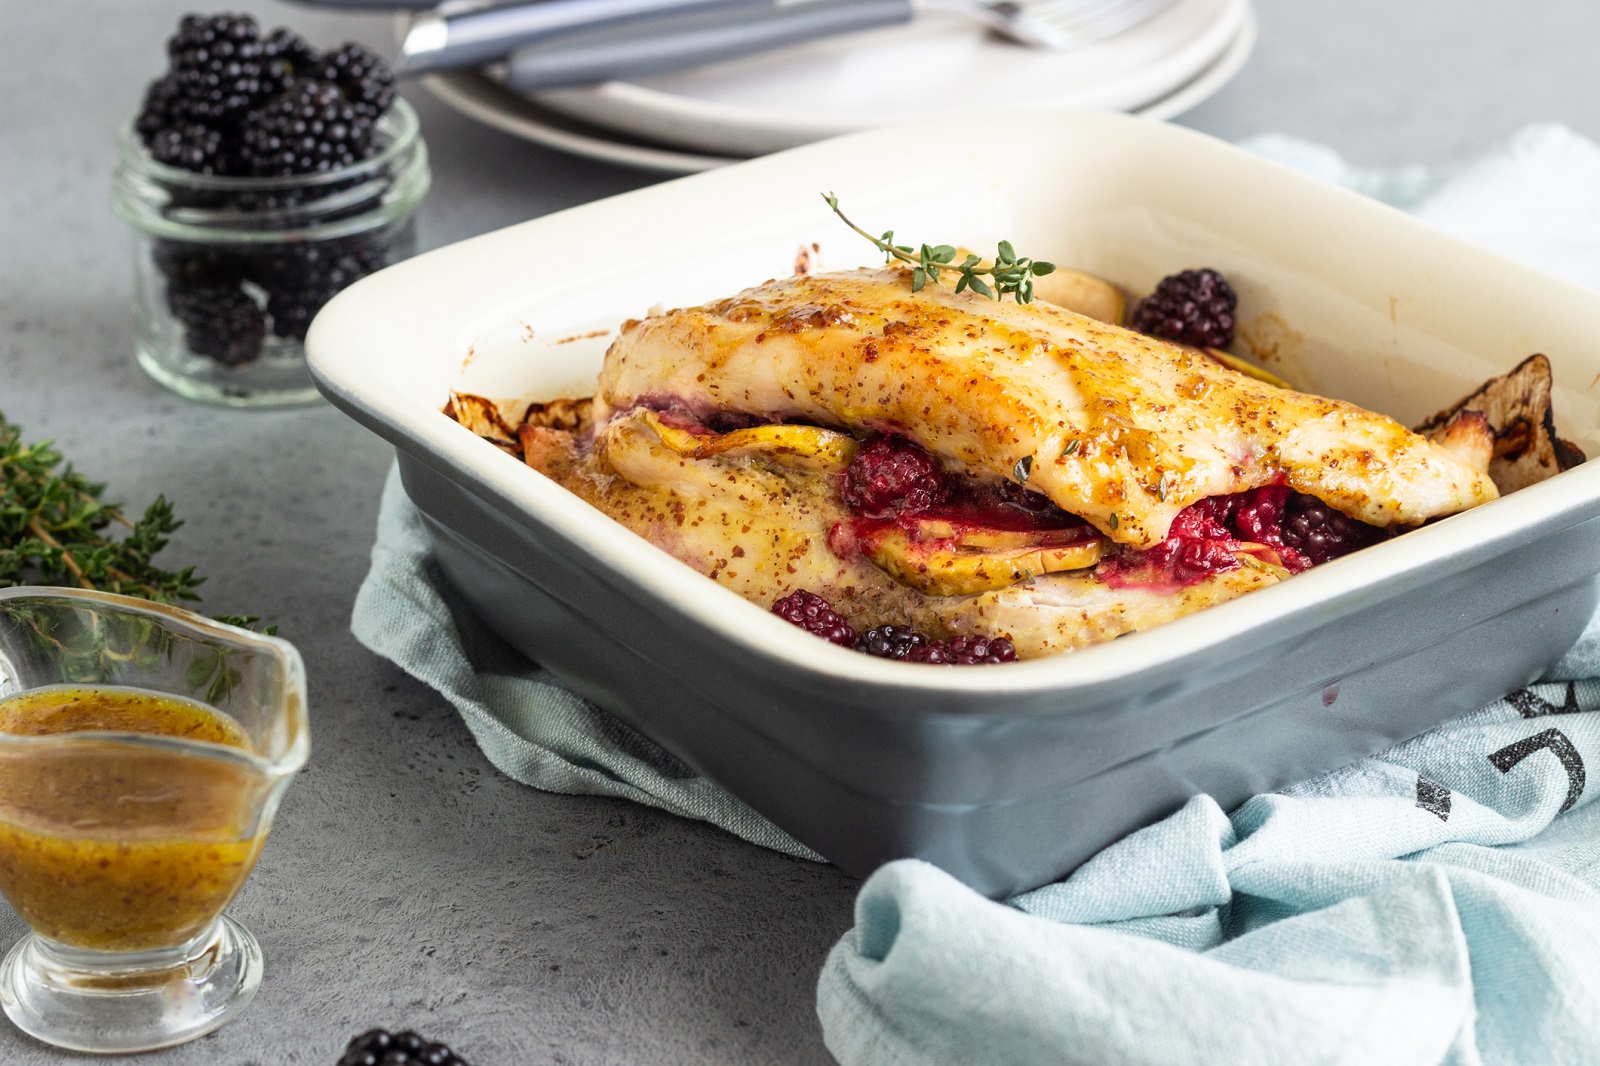 Baked turkey or chicken breast stuffed with apples and blackberries. Light grey background.